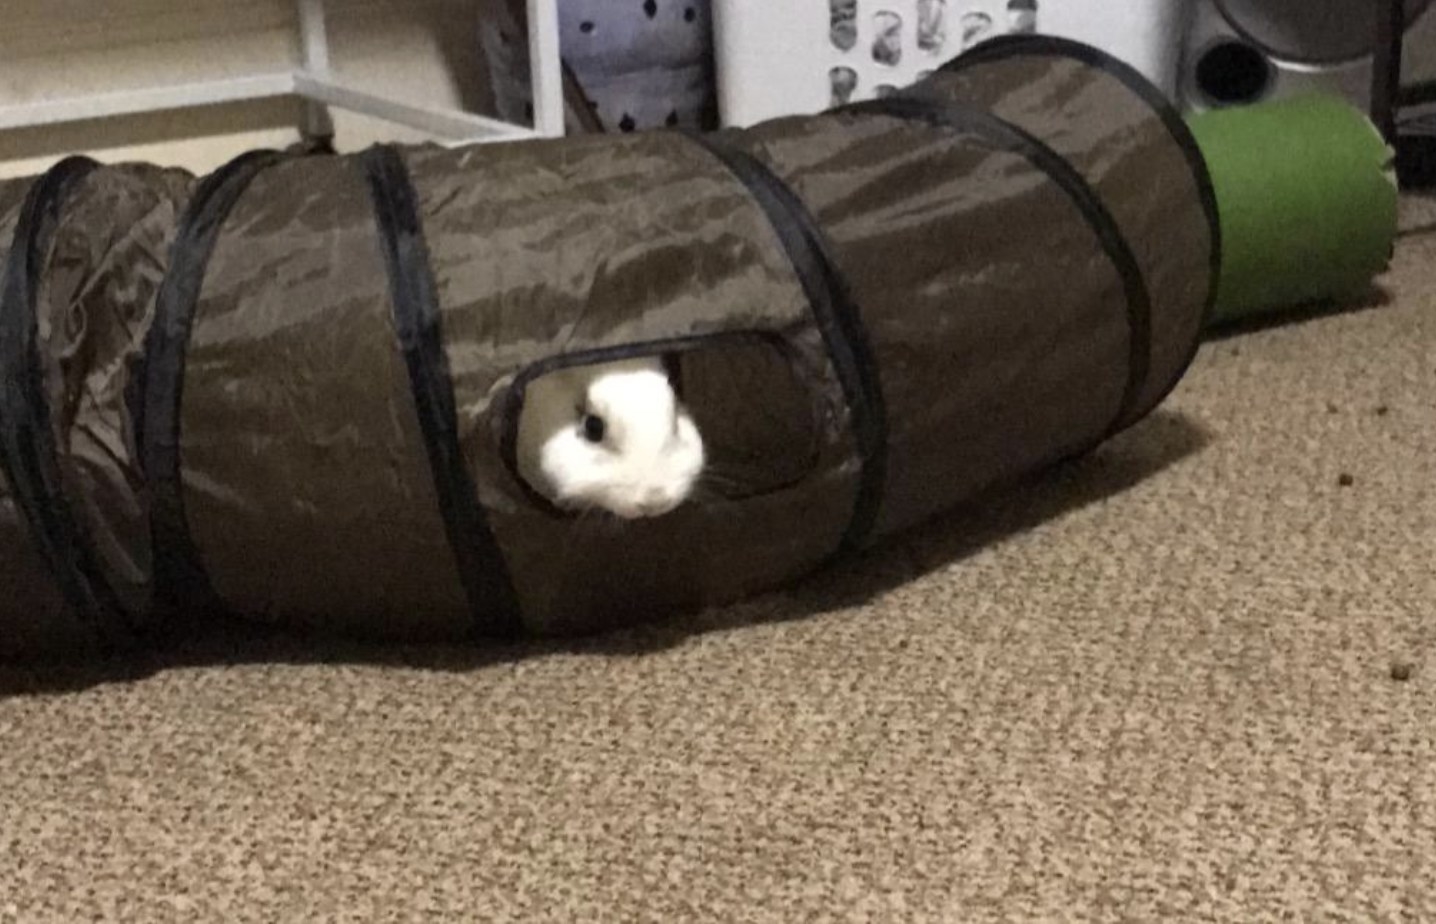 An image of a bunny sticking its head out of an opening of a crinkly tunnel